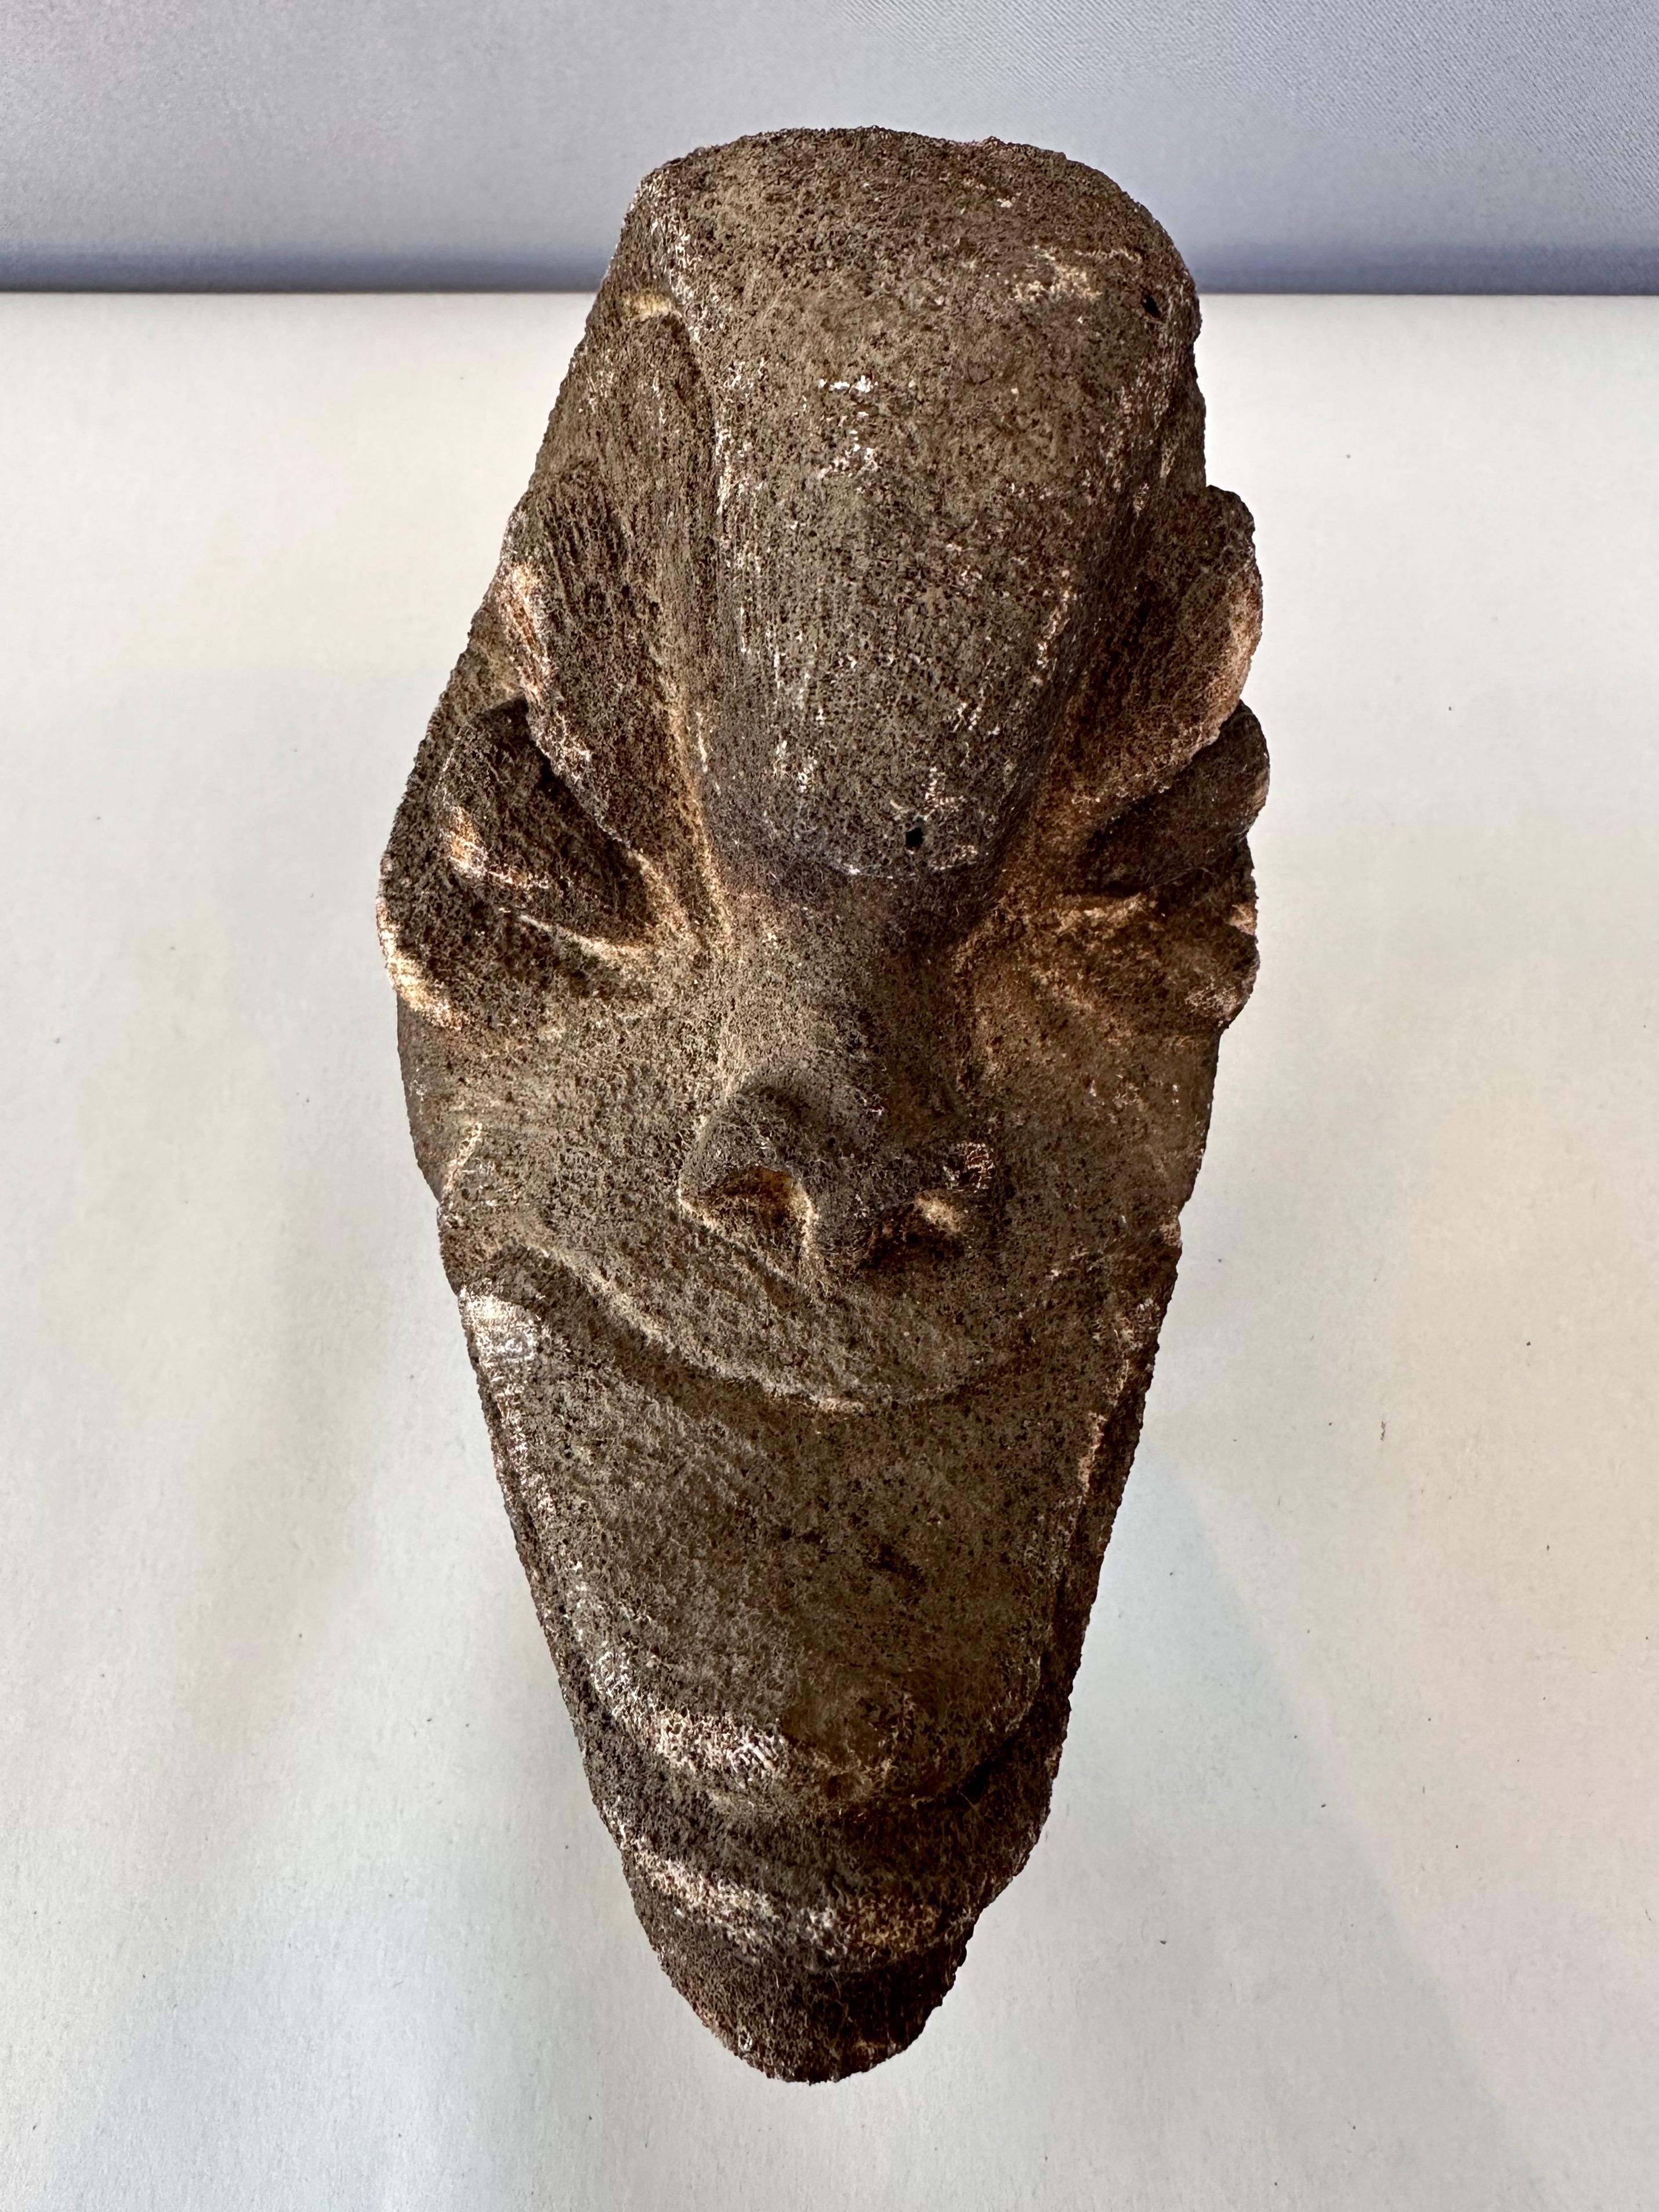 Antique Oceania Blackened Carved Coral Ancestor’s Head #831, 19th Century 5